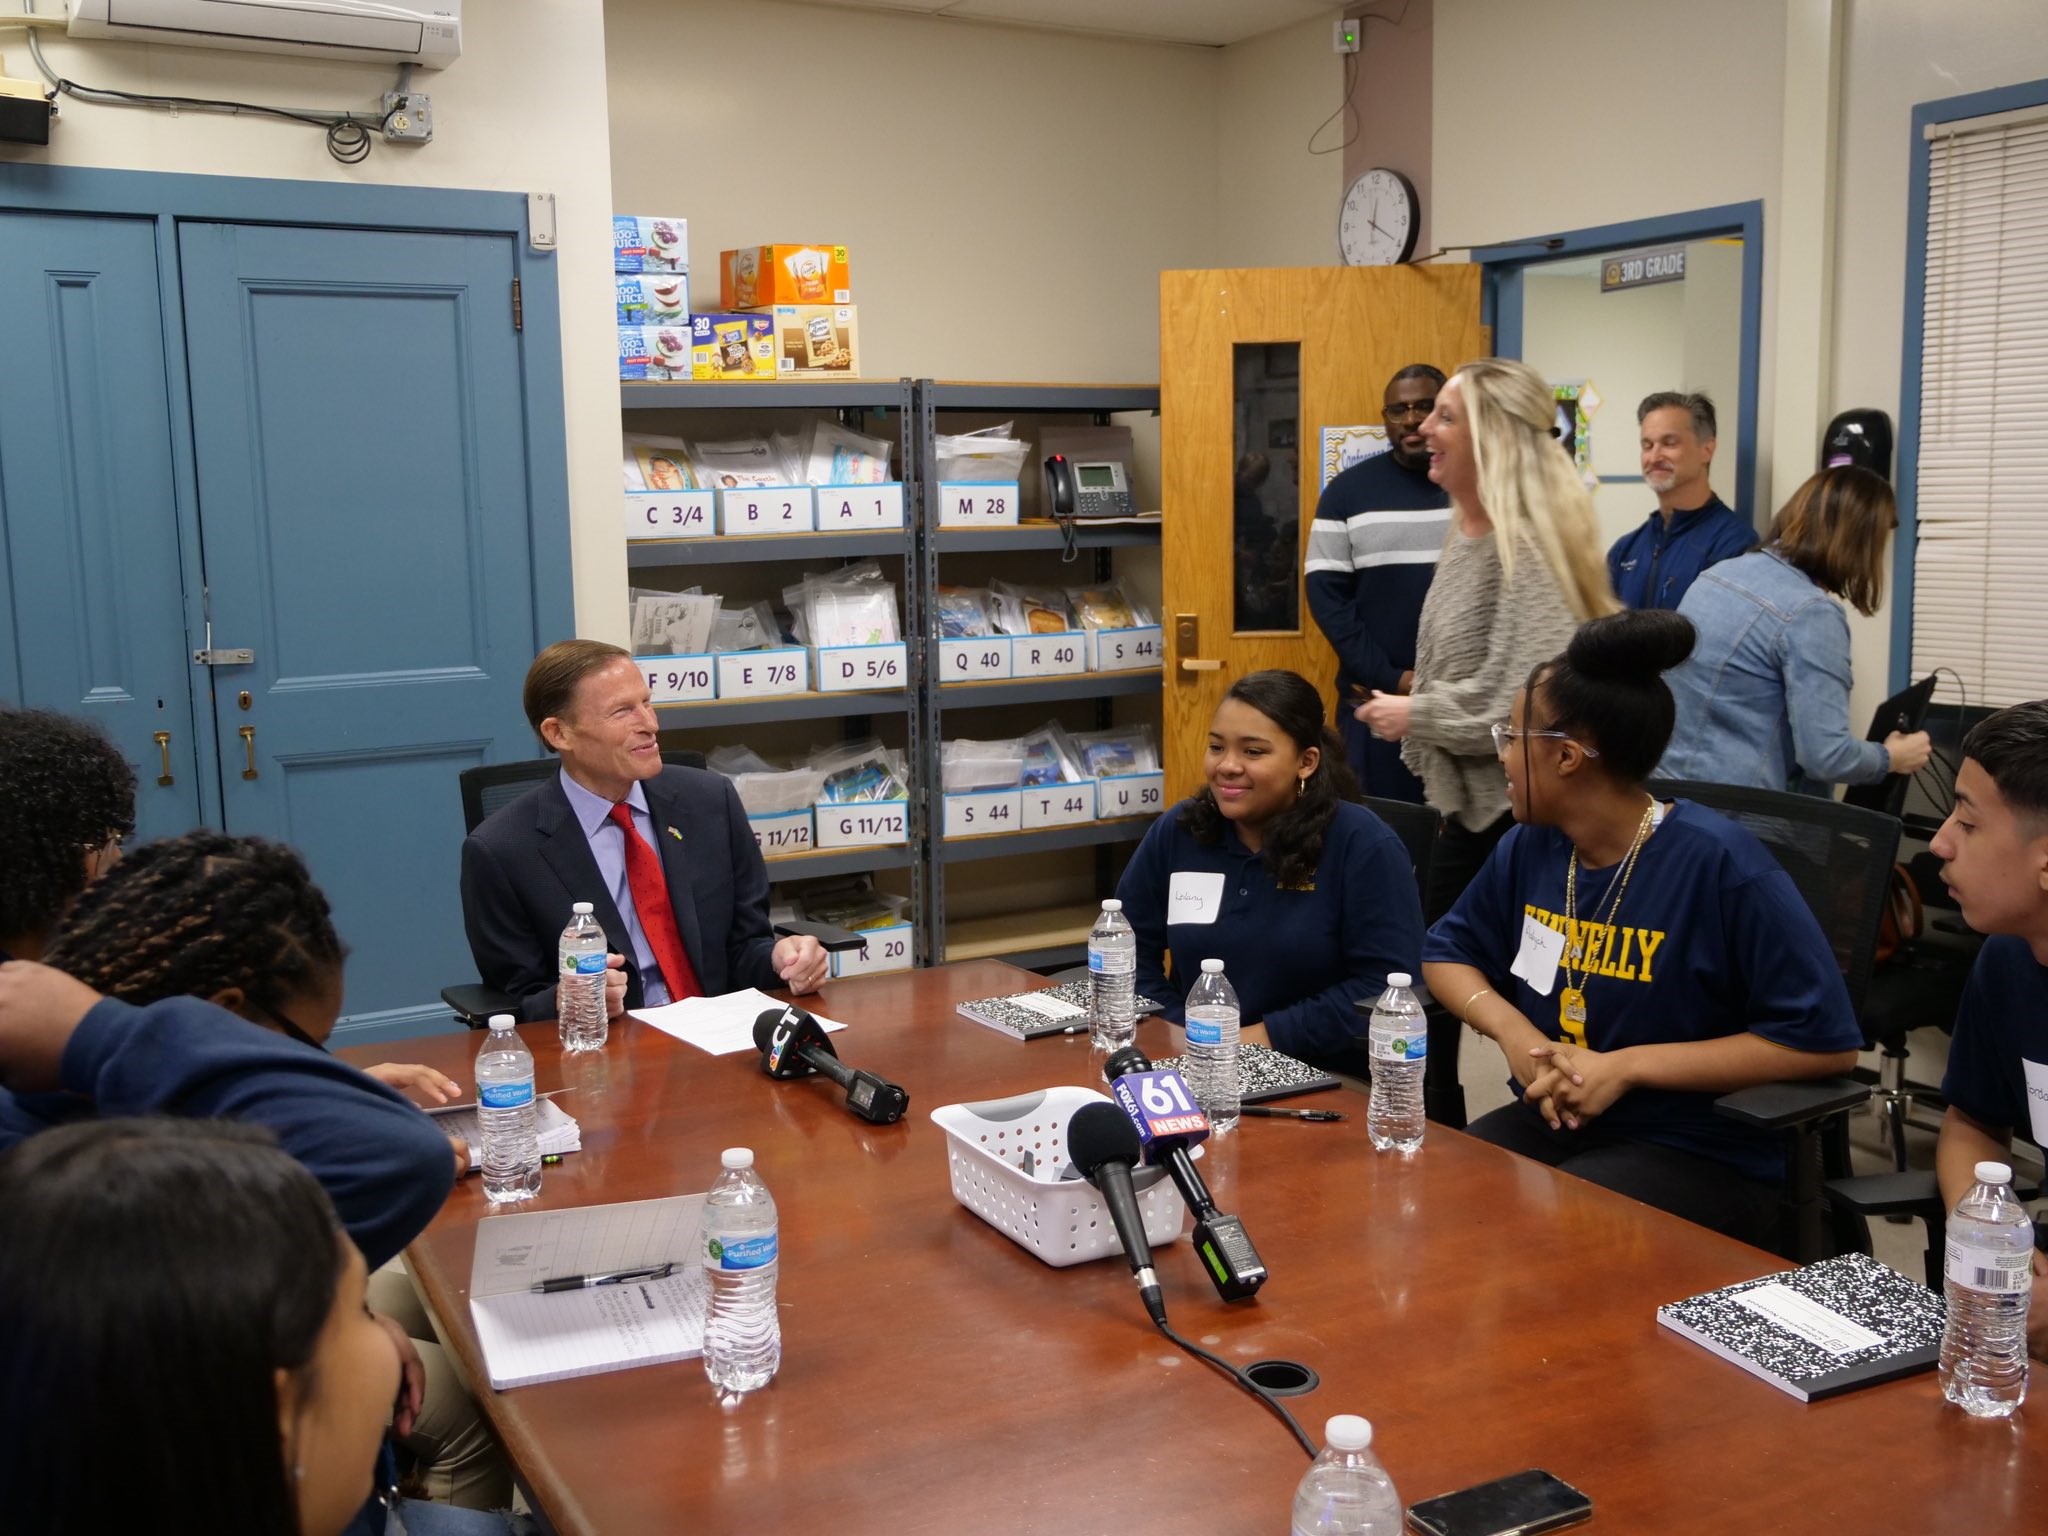 Blumenthal held a roundtable with Hartford middle school students, clinicians, and advocates to discuss the dangers young people face online and urge the importance of passing the Kids Online Safety Act.